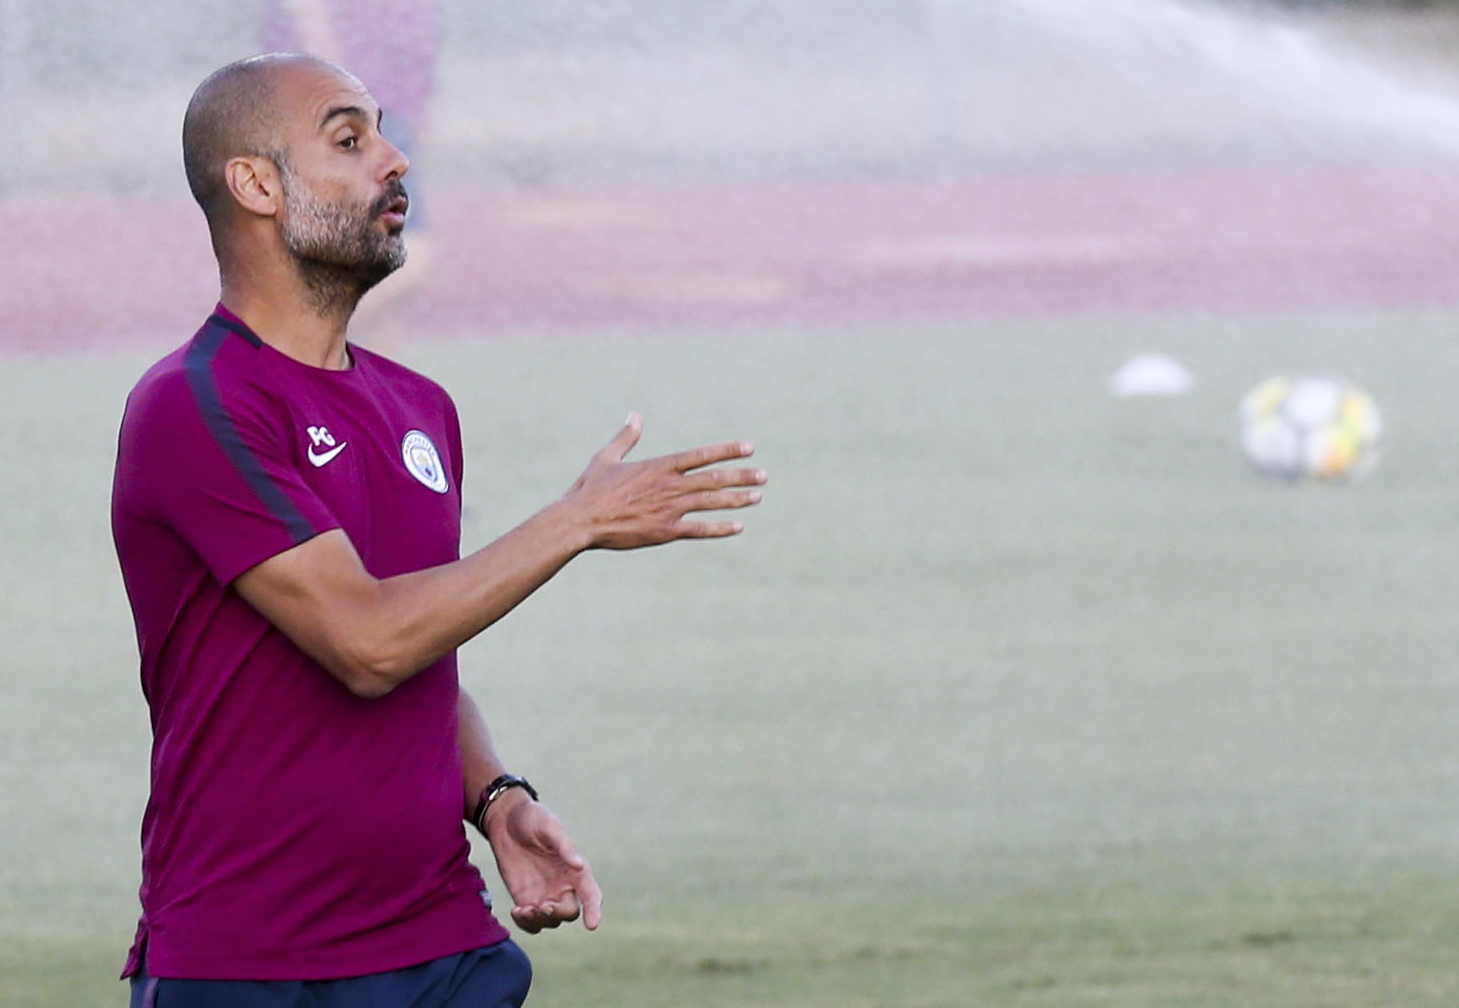 Manchester City head coach Pep Guardiola speaks to players during in a training session at the StubHub Center on July 25, 2017 in Carson, California.  / AFP PHOTO / RINGO CHIU        (Photo credit should read RINGO CHIU/AFP/Getty Images)